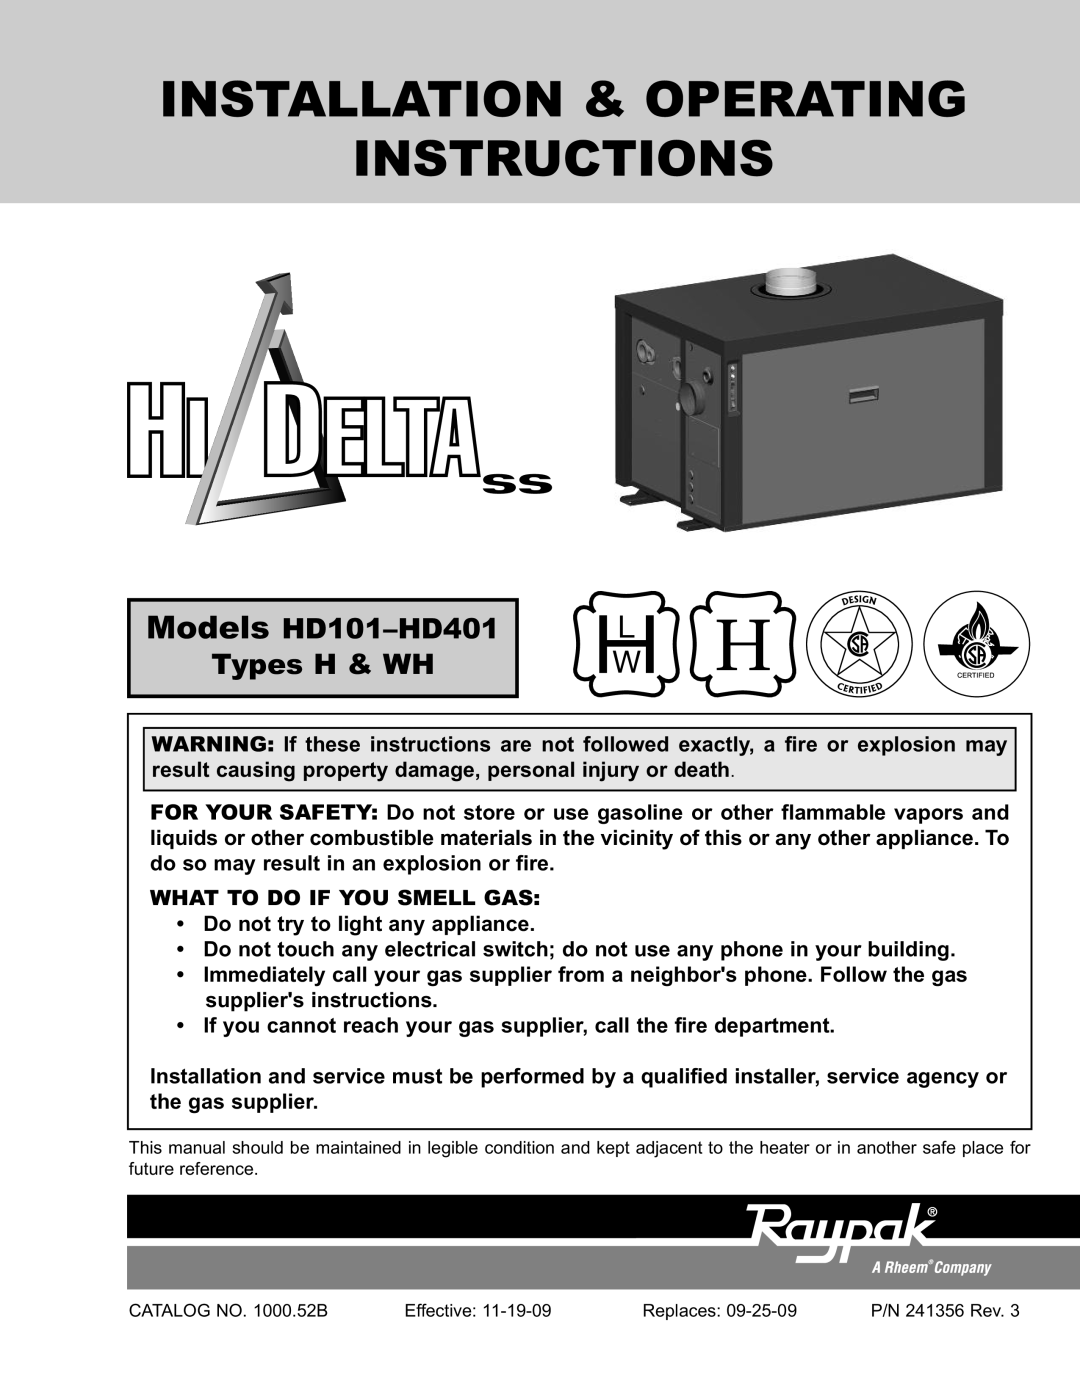 Raypak HD101, HD401 operating instructions What To Do If You Smell Gas, Do not try to light any appliance 